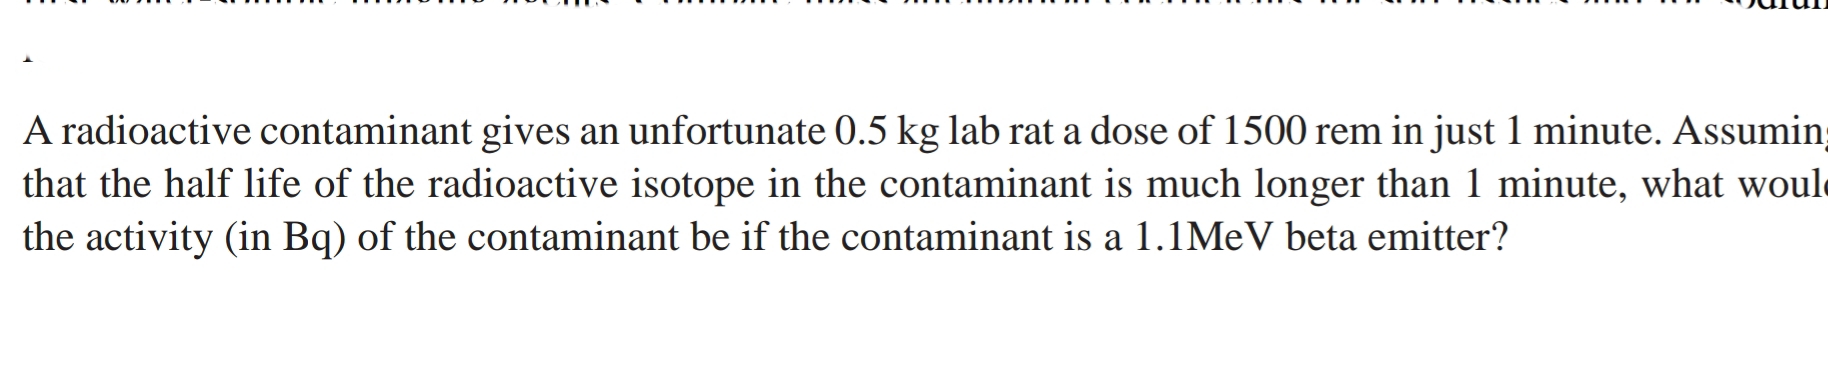 A radioactive contaminant gives an unfortunate 0.5 kg lab rat a dose of 1500 rem in just 1 minute. Assumin
that the half life of the radioactive isotope in the contaminant is much longer than 1 minute, what woul
the activity (in Bq) of the contaminant be if the contaminant is a 1.1MEV beta emitter?
